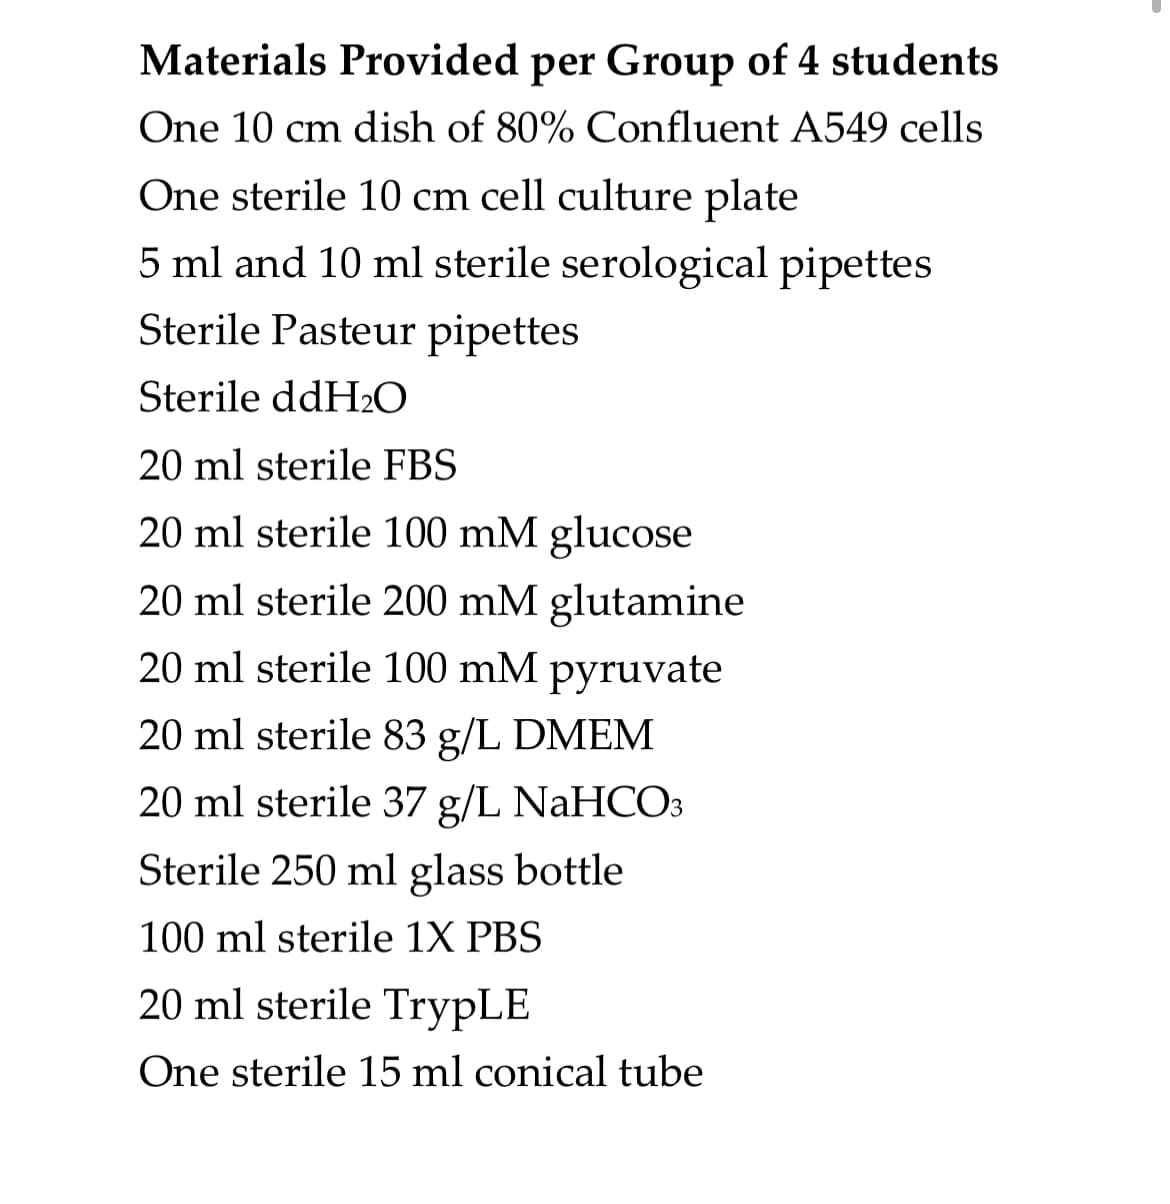 Materials Provided per Group of 4 students
One 10 cm dish of 80% Confluent A549 cells
One sterile 10 cm cell culture plate
5 ml and 10 ml sterile serological pipettes
Sterile Pasteur pipettes
Sterile ddH2O
20 ml sterile FBS
20 ml sterile 100 mM glucose
20 ml sterile 200 mM glutamine
20 ml sterile 100 mM pyruvate
20 ml sterile 83 g/L DMEM
20 ml sterile 37 g/L NaHCO3
Sterile 250 ml glass bottle
100 ml sterile 1X PBS
20 ml sterile TrypLE
One sterile 15 ml conical tube
